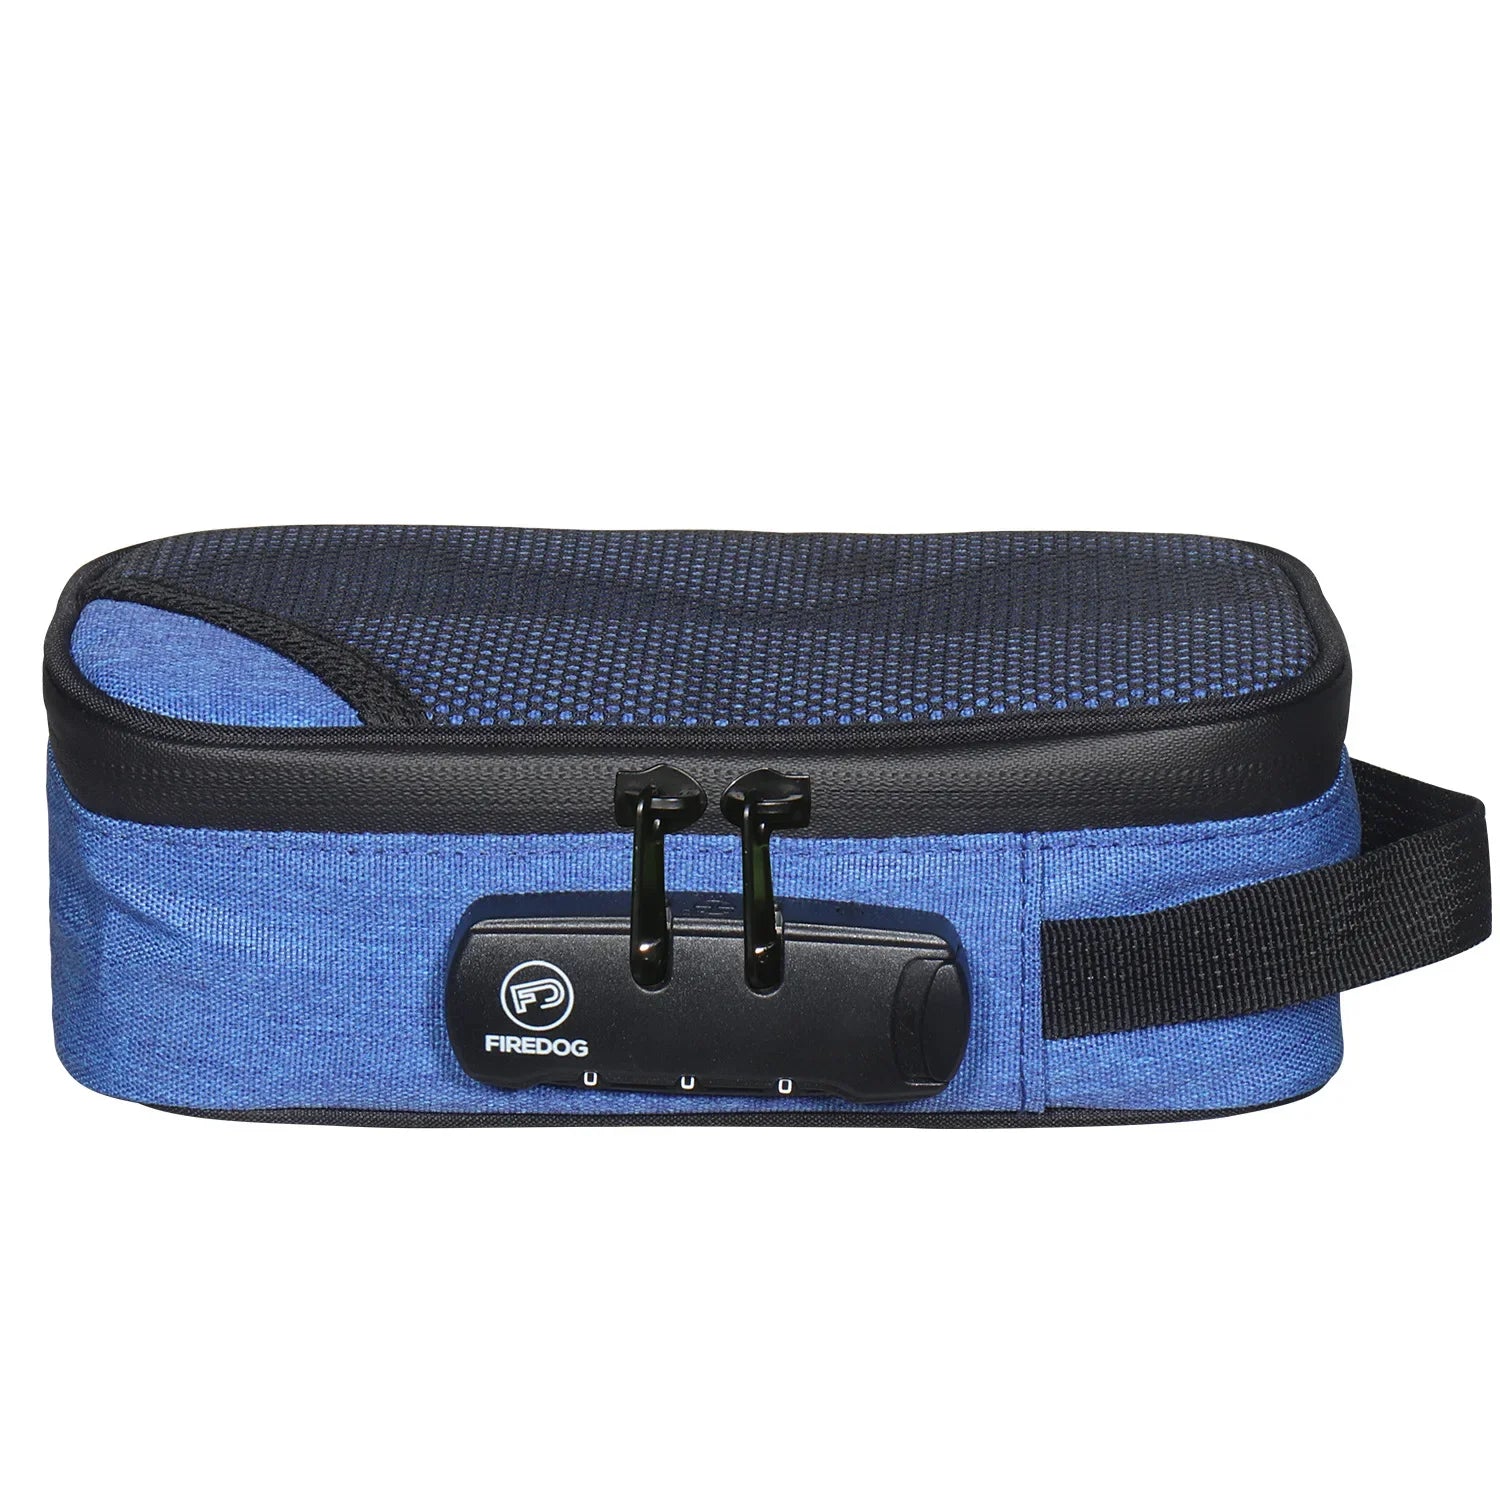 This Odor Smell Proof Cigarette Smoking Stash Bag showcases a sleek, rectangular design, available in various colors including classic gray, vibrant blue, and a playful pink camouflage pattern. The portable size and lockable feature, highlighted by a prominent combination lock on the front, make it a top-choice travel accessory for securing tobacco products. stash bag